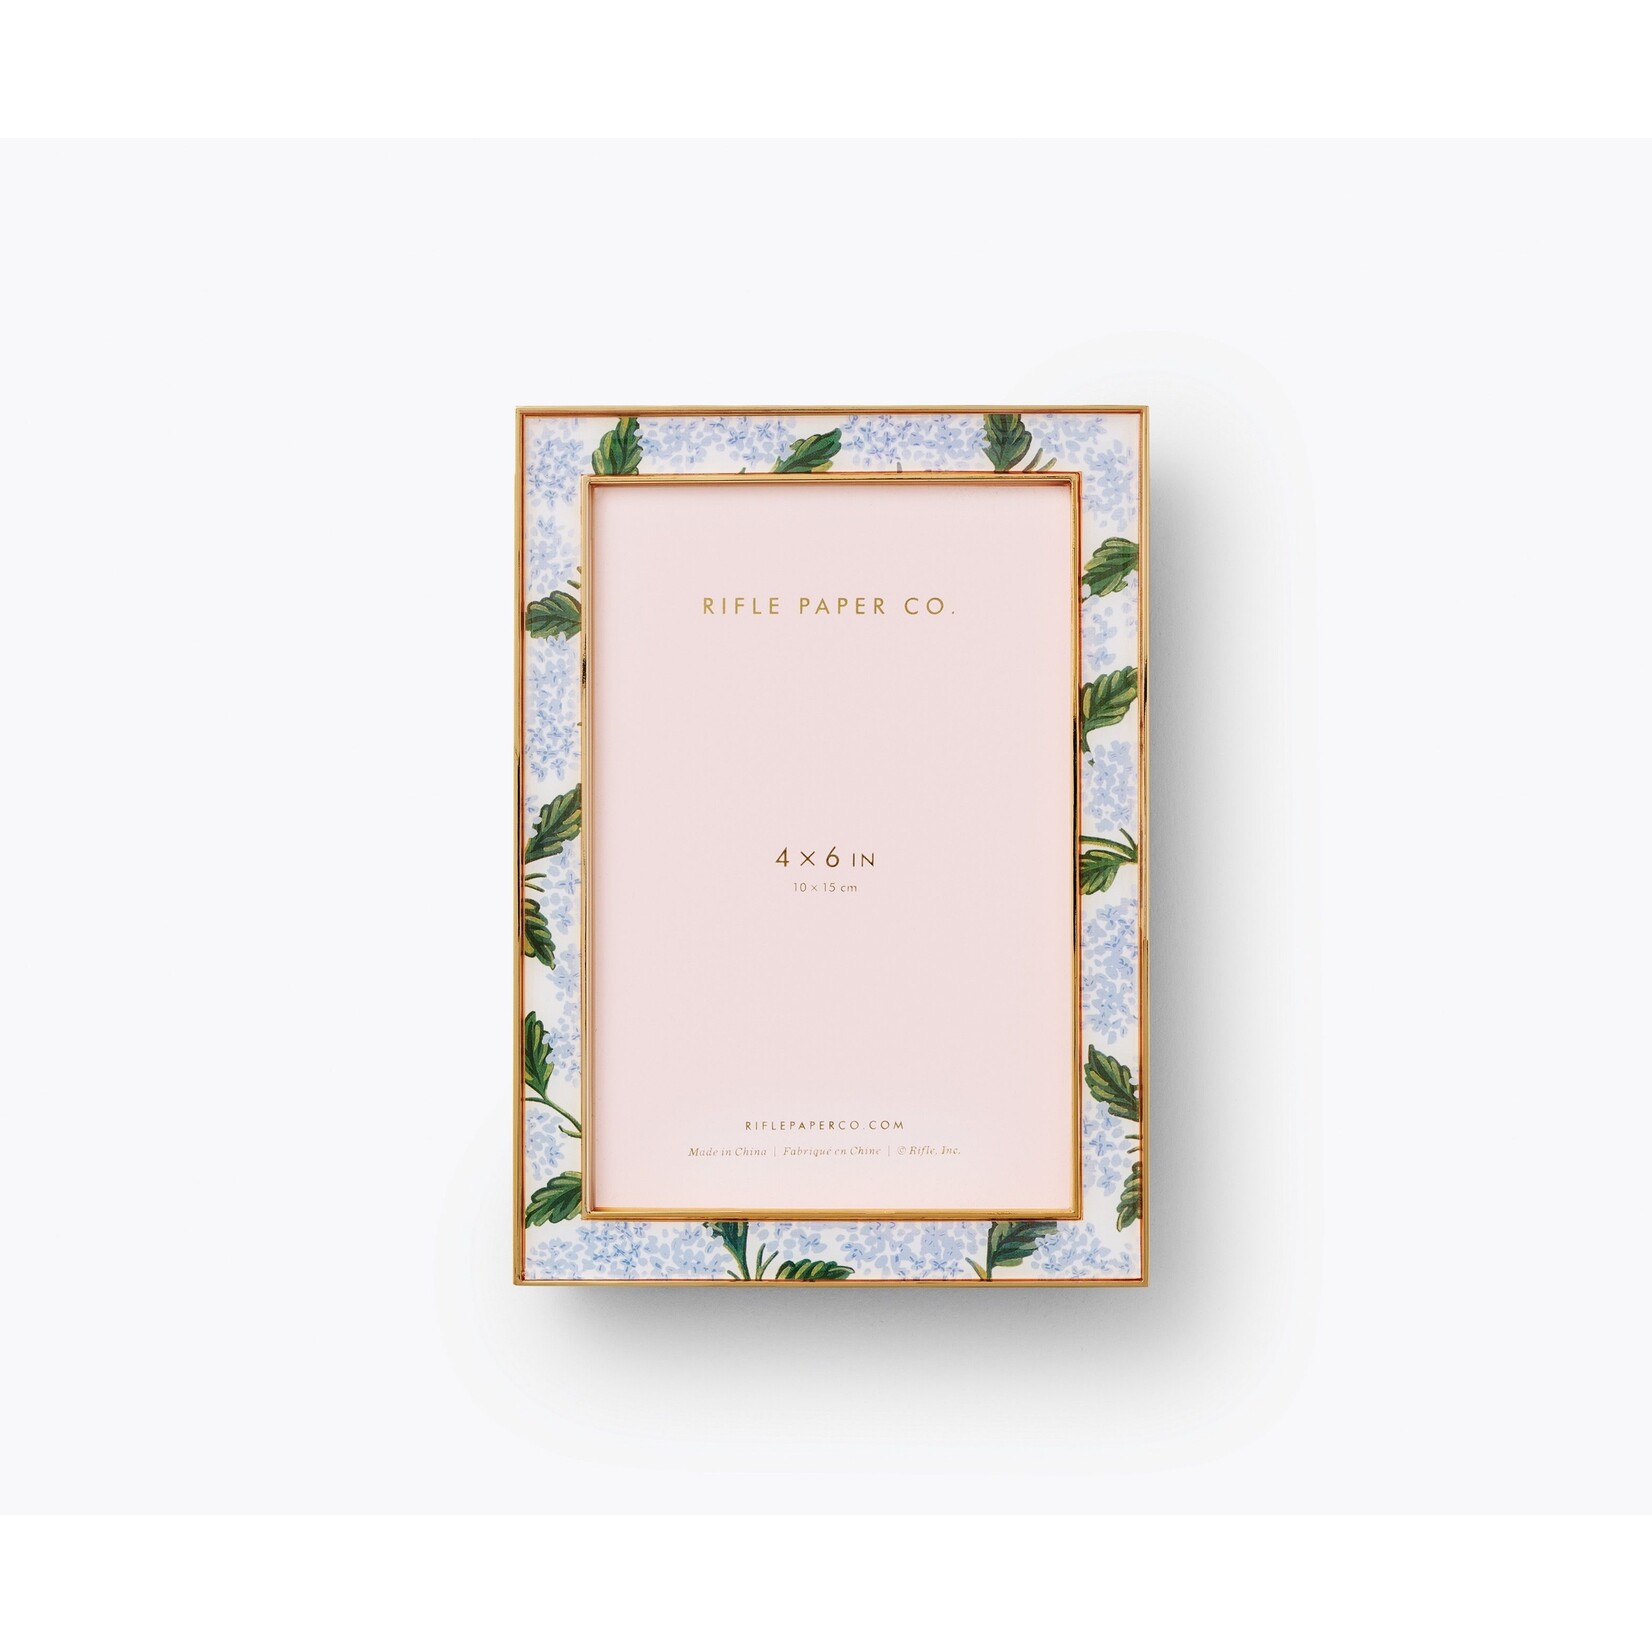 Rifle Paper Co Floral Picture Frames in 4x6